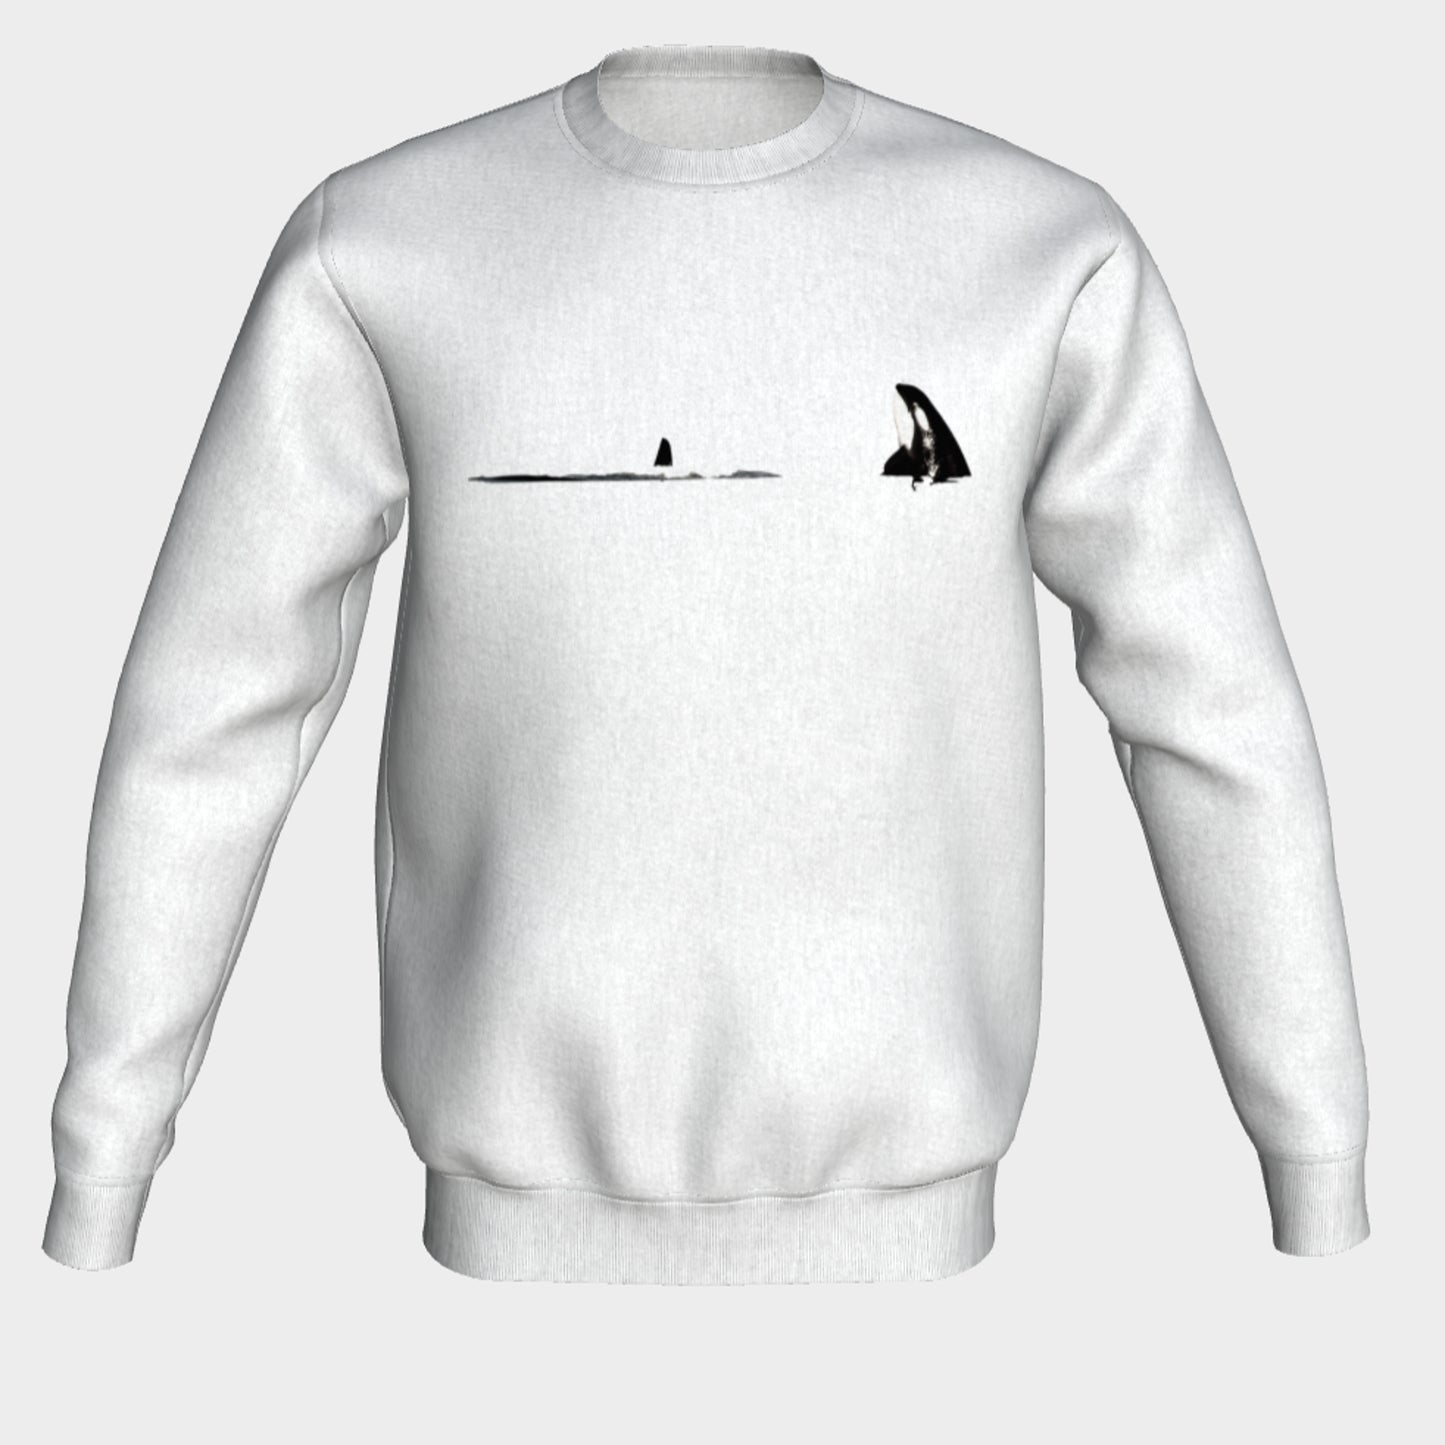 Orca Spy Hop Crewneck Sweatshirt What’s better than a super cozy sweatshirt? A super cozy sweatshirt from Van Isle Goddess!  Super cozy unisex sweatshirt for those chilly days.  Excellent for men or women.   Fit is roomy and comfortable. 